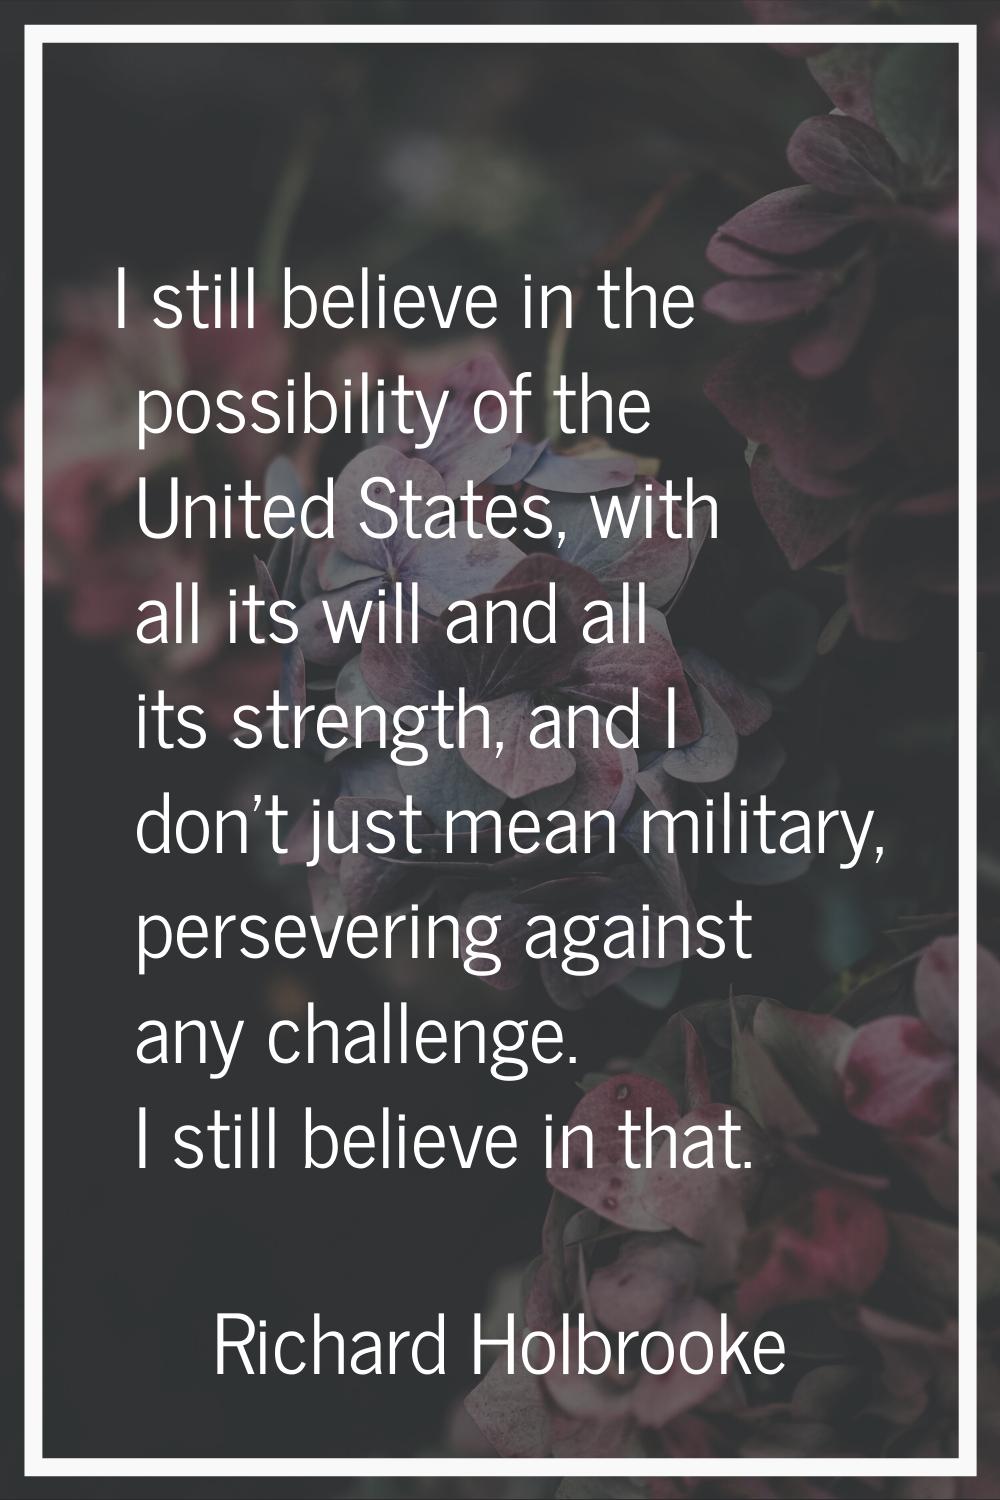 I still believe in the possibility of the United States, with all its will and all its strength, an